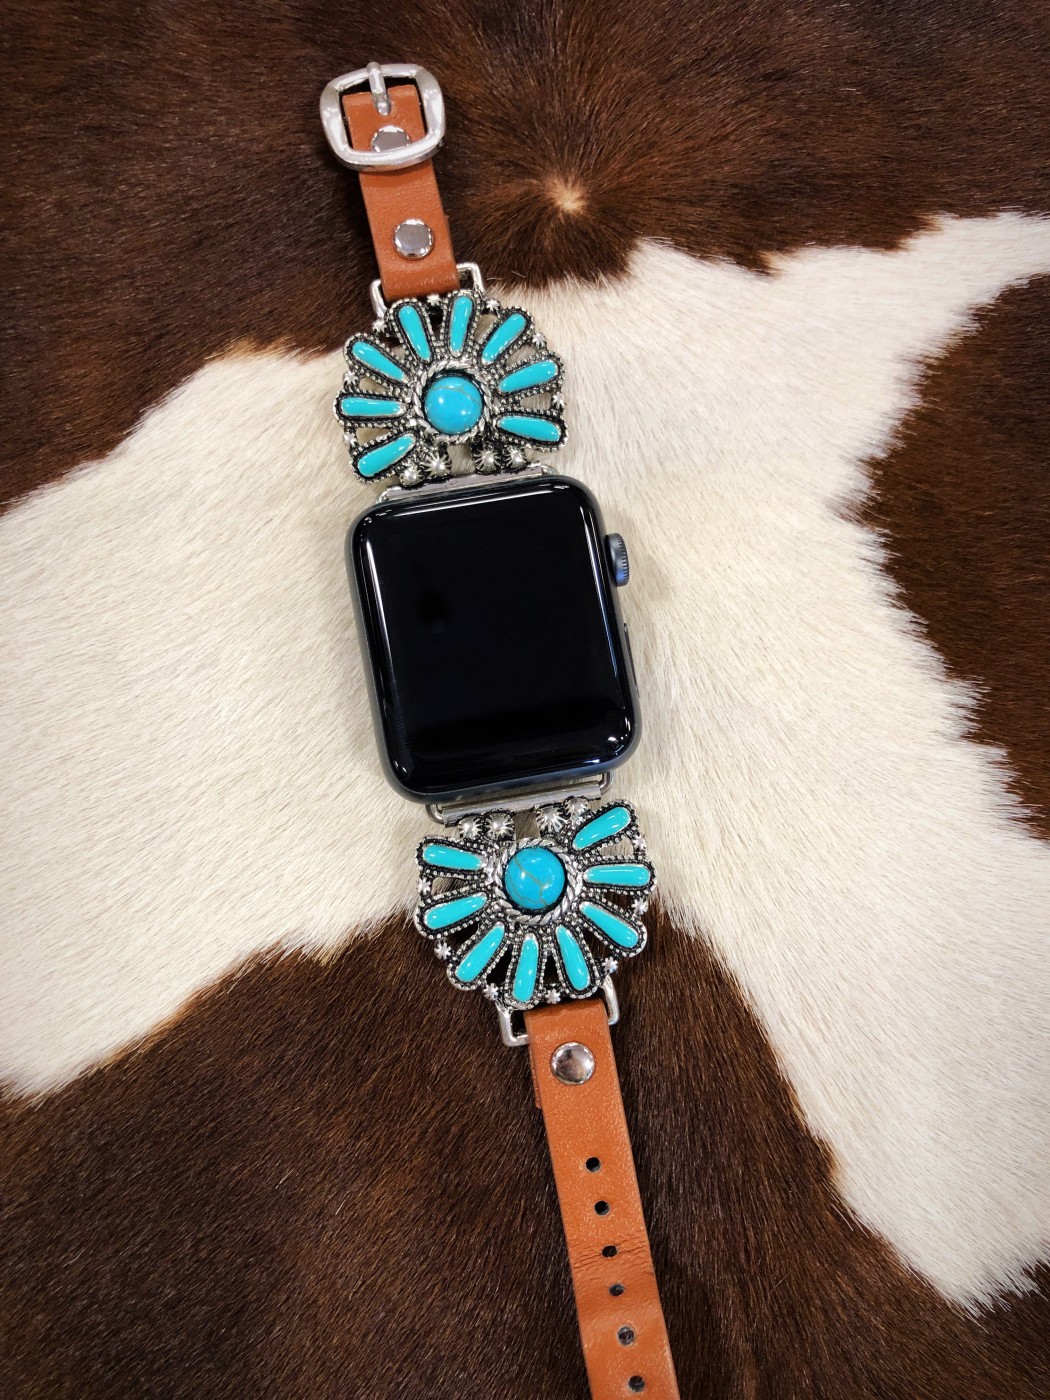 Phone Shop Highway ” Flower Concho Watch Band ( Brown / Turquoise )